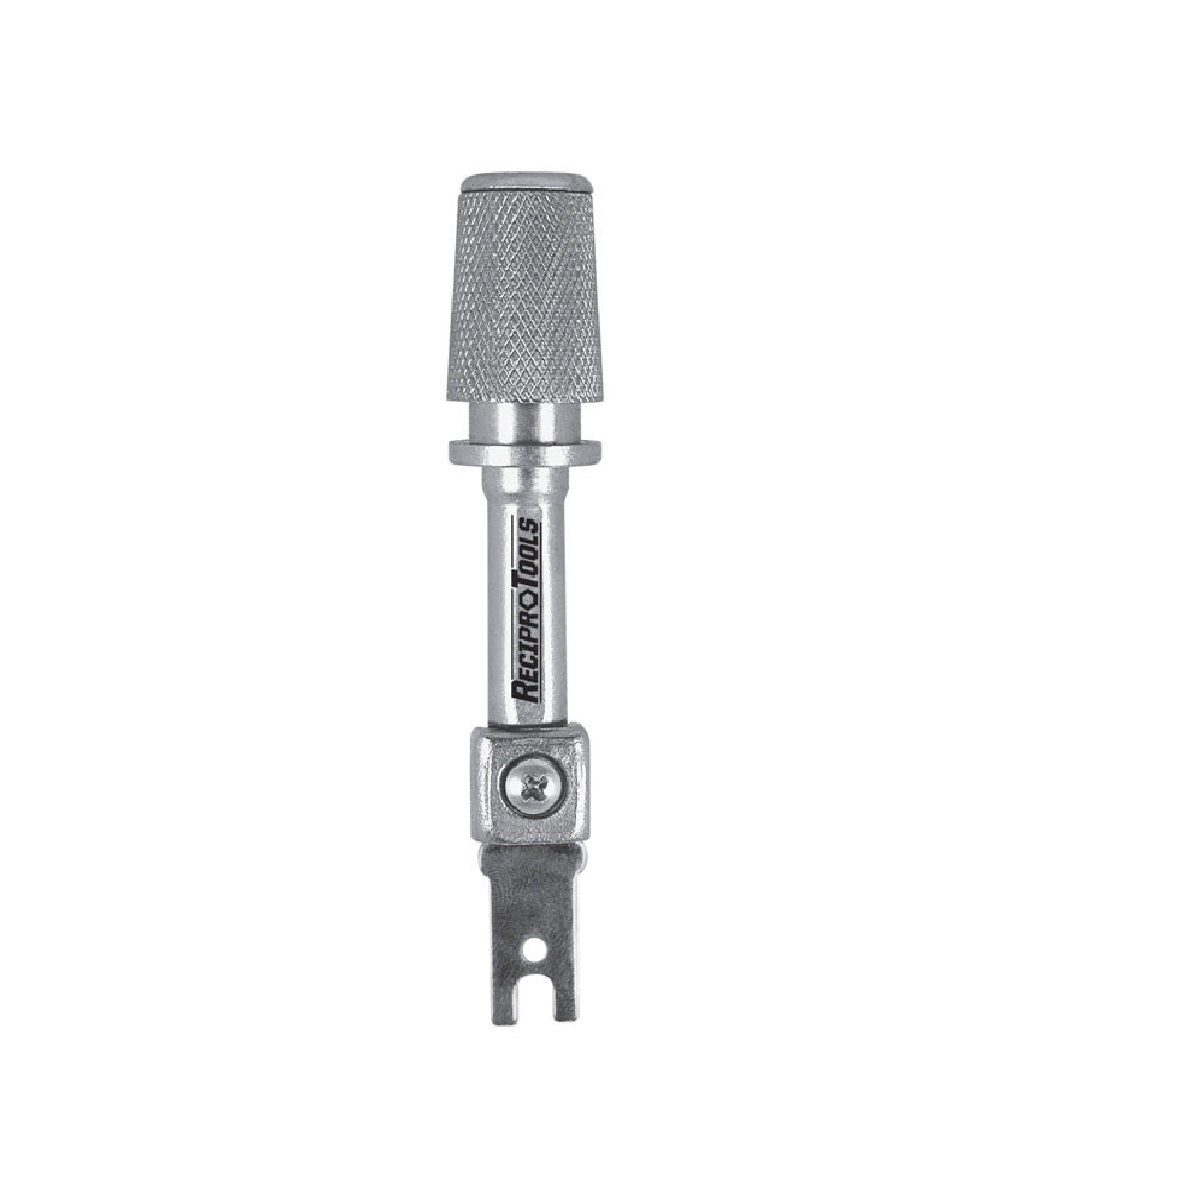 Buy recipro tools - Online store for power tool accessories, power cutting accessories in USA, on sale, low price, discount deals, coupon code